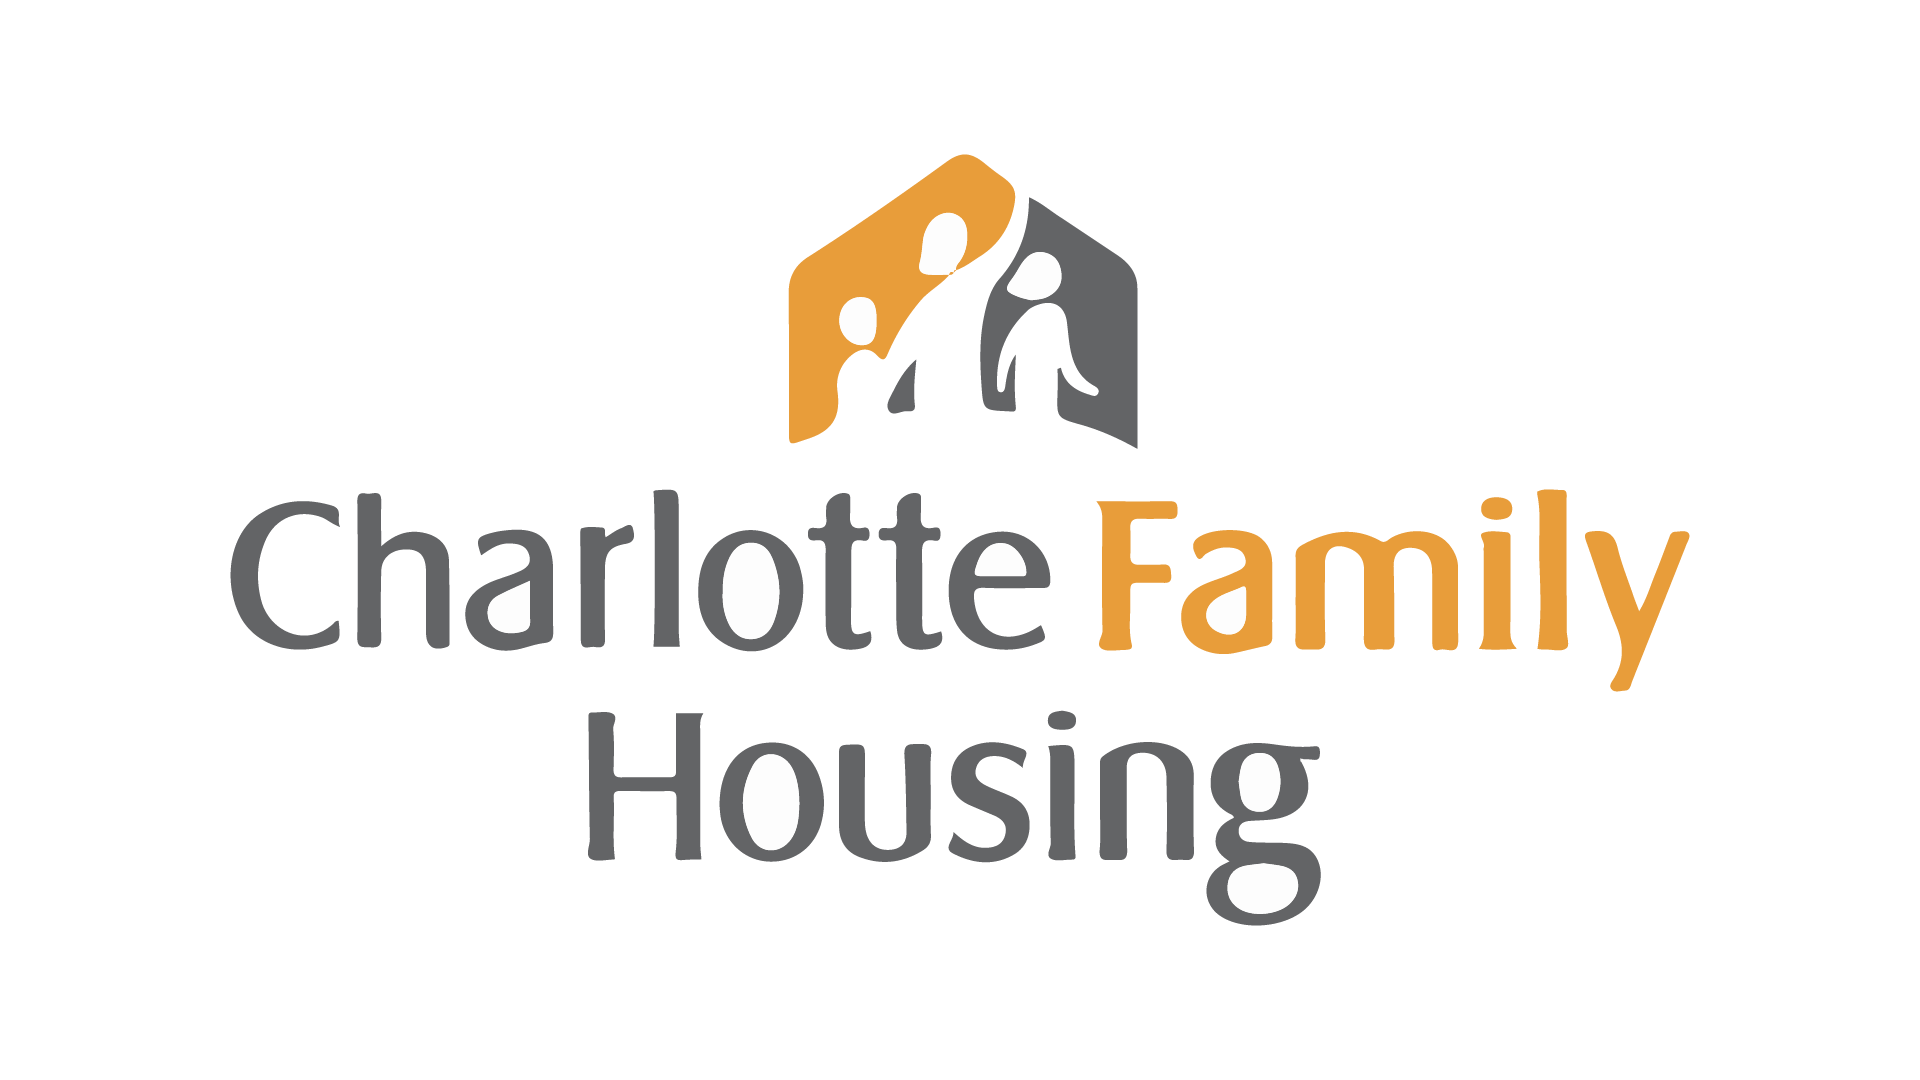 Charlotte-Family-Housing.png